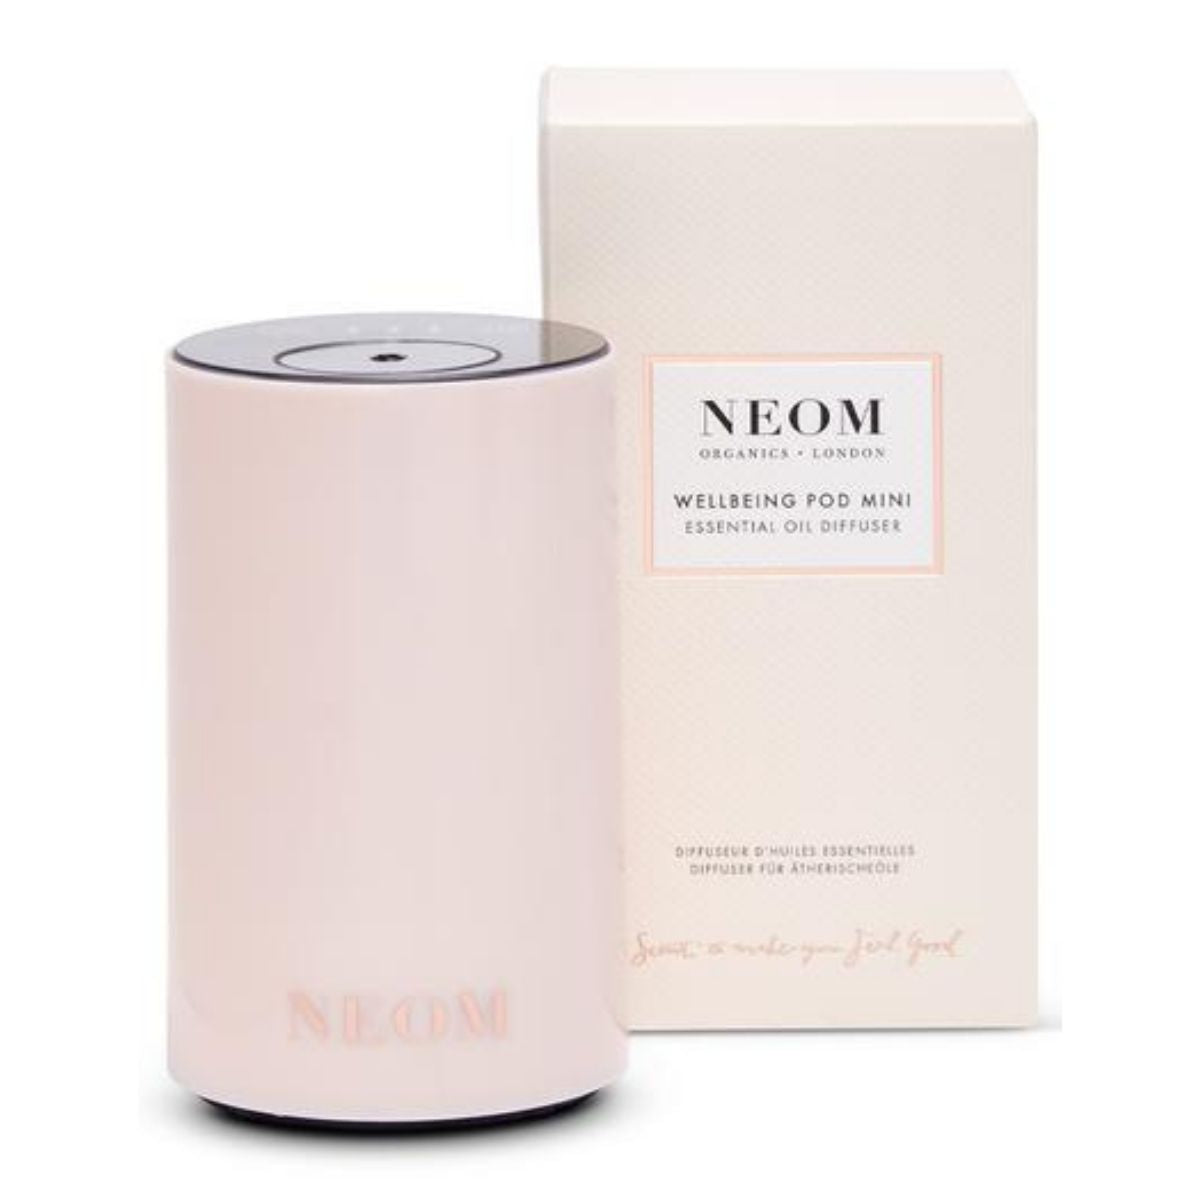 Neom Wellbeing Pod Mini Essential Oil Diffuser Nude